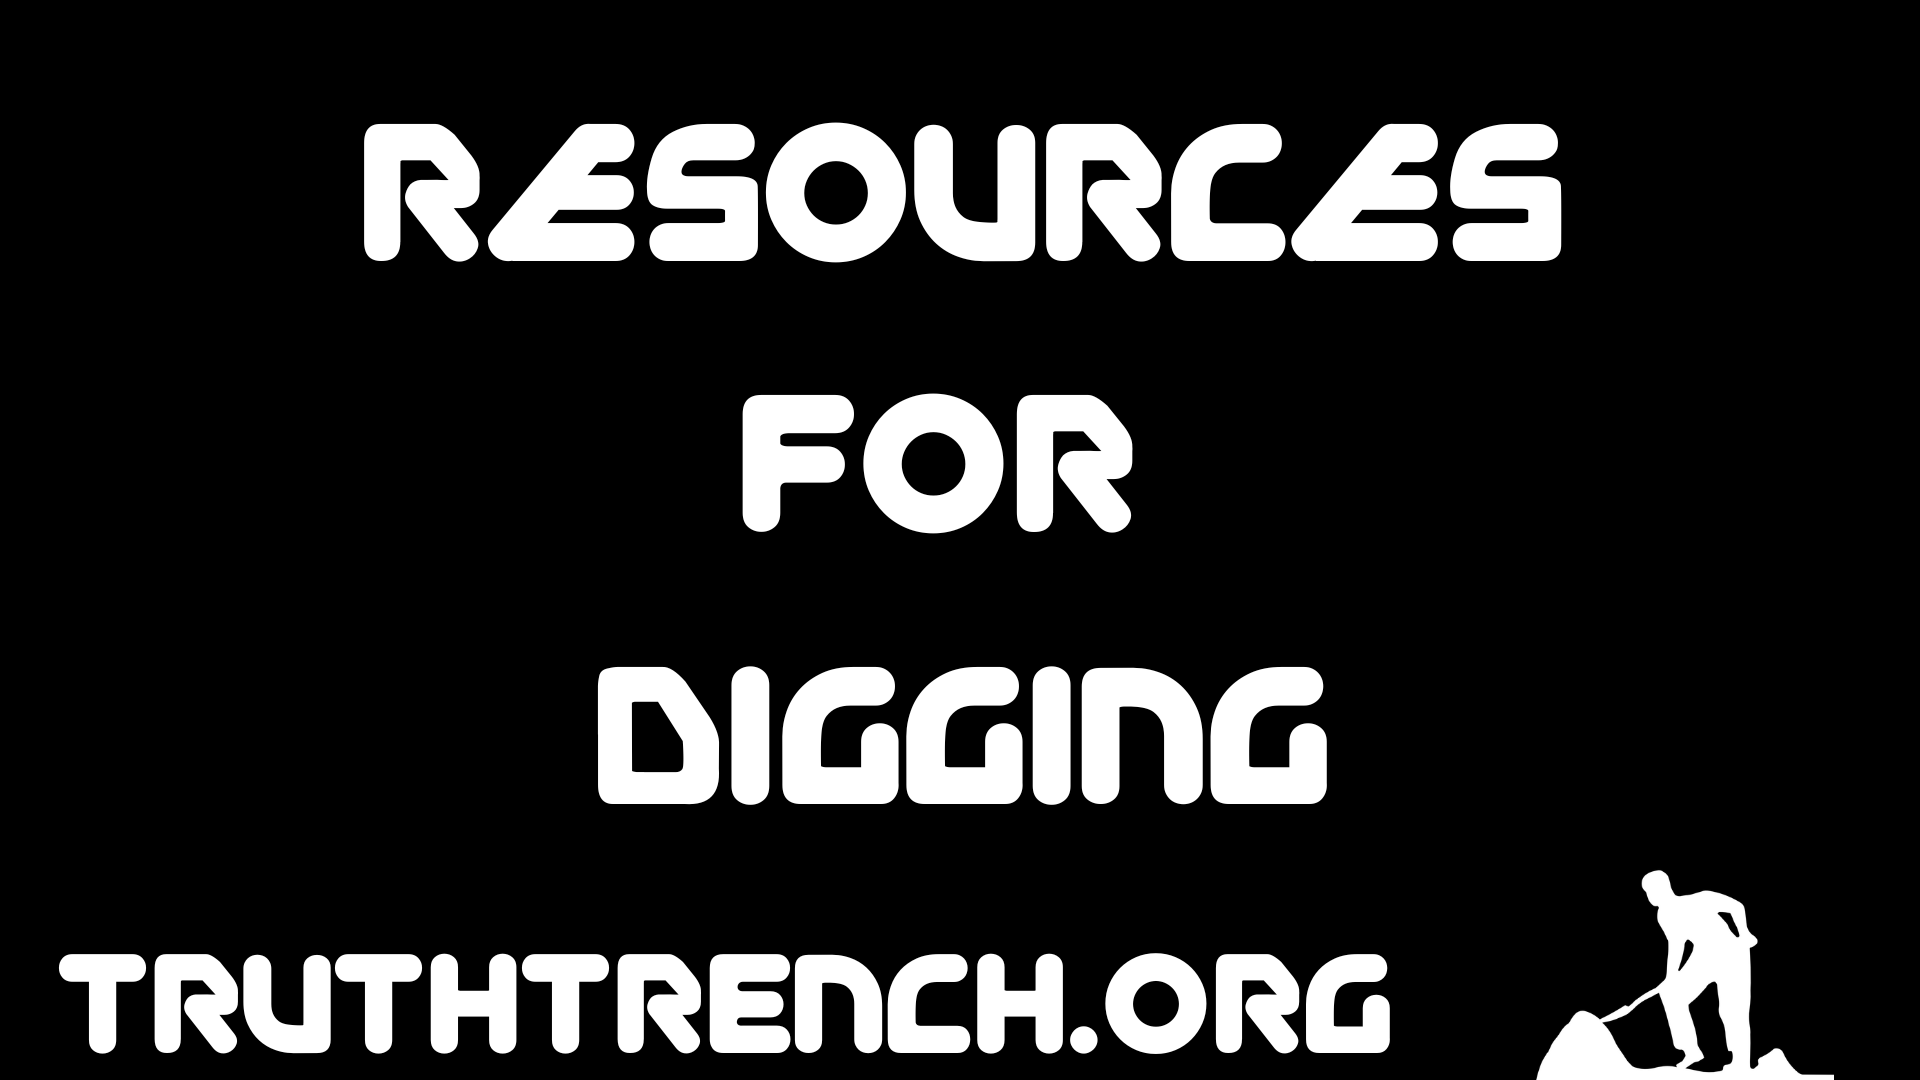 RESOURCES FOR DIGGING - Truth Trench